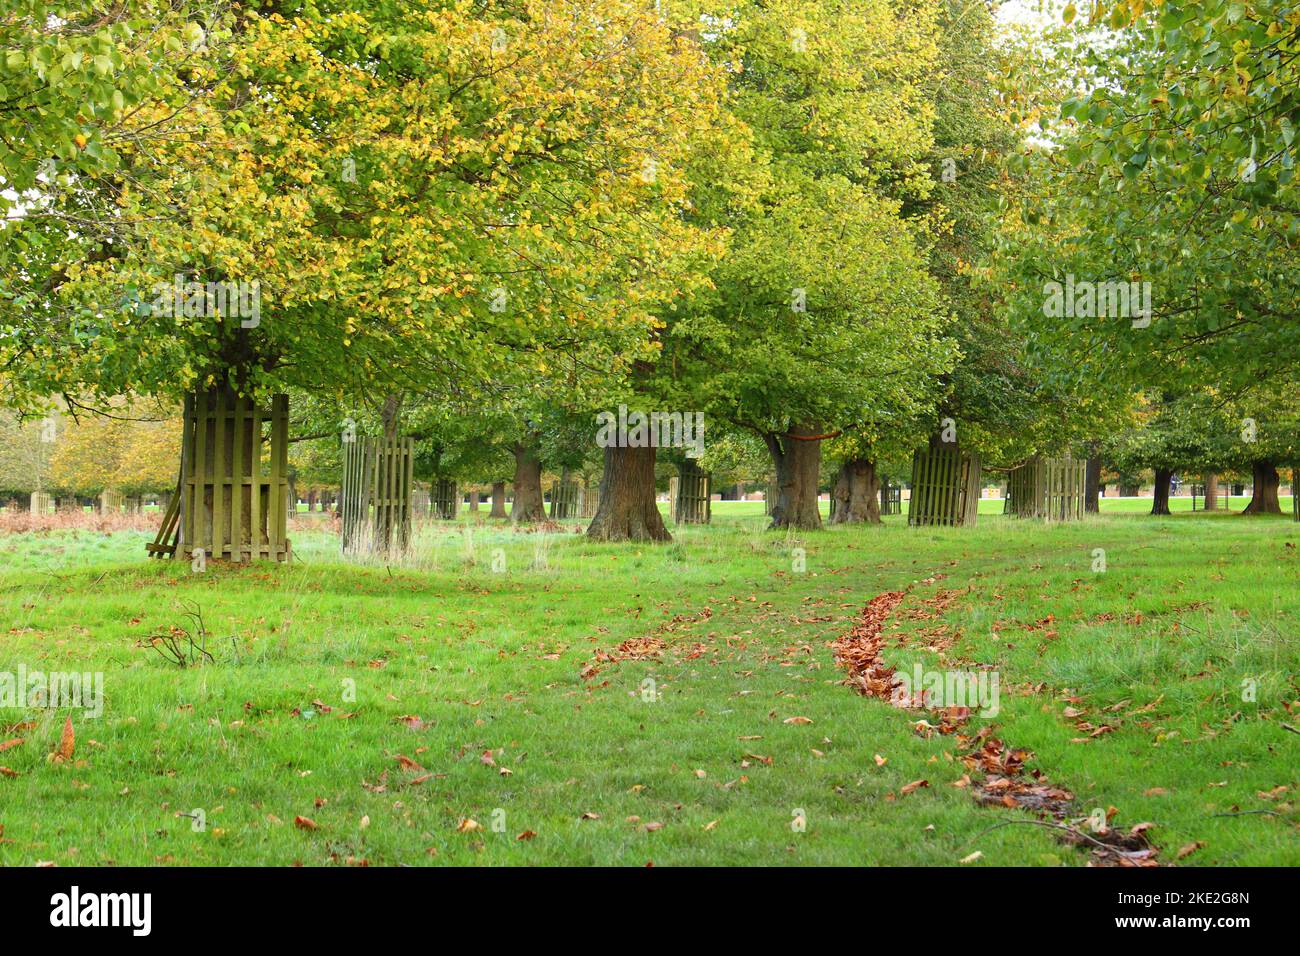 Autumn in the park. Path through green grass in park with autumnal deciduous trees whose leaves are changing. Calm fall nature landscape for walking Stock Photo